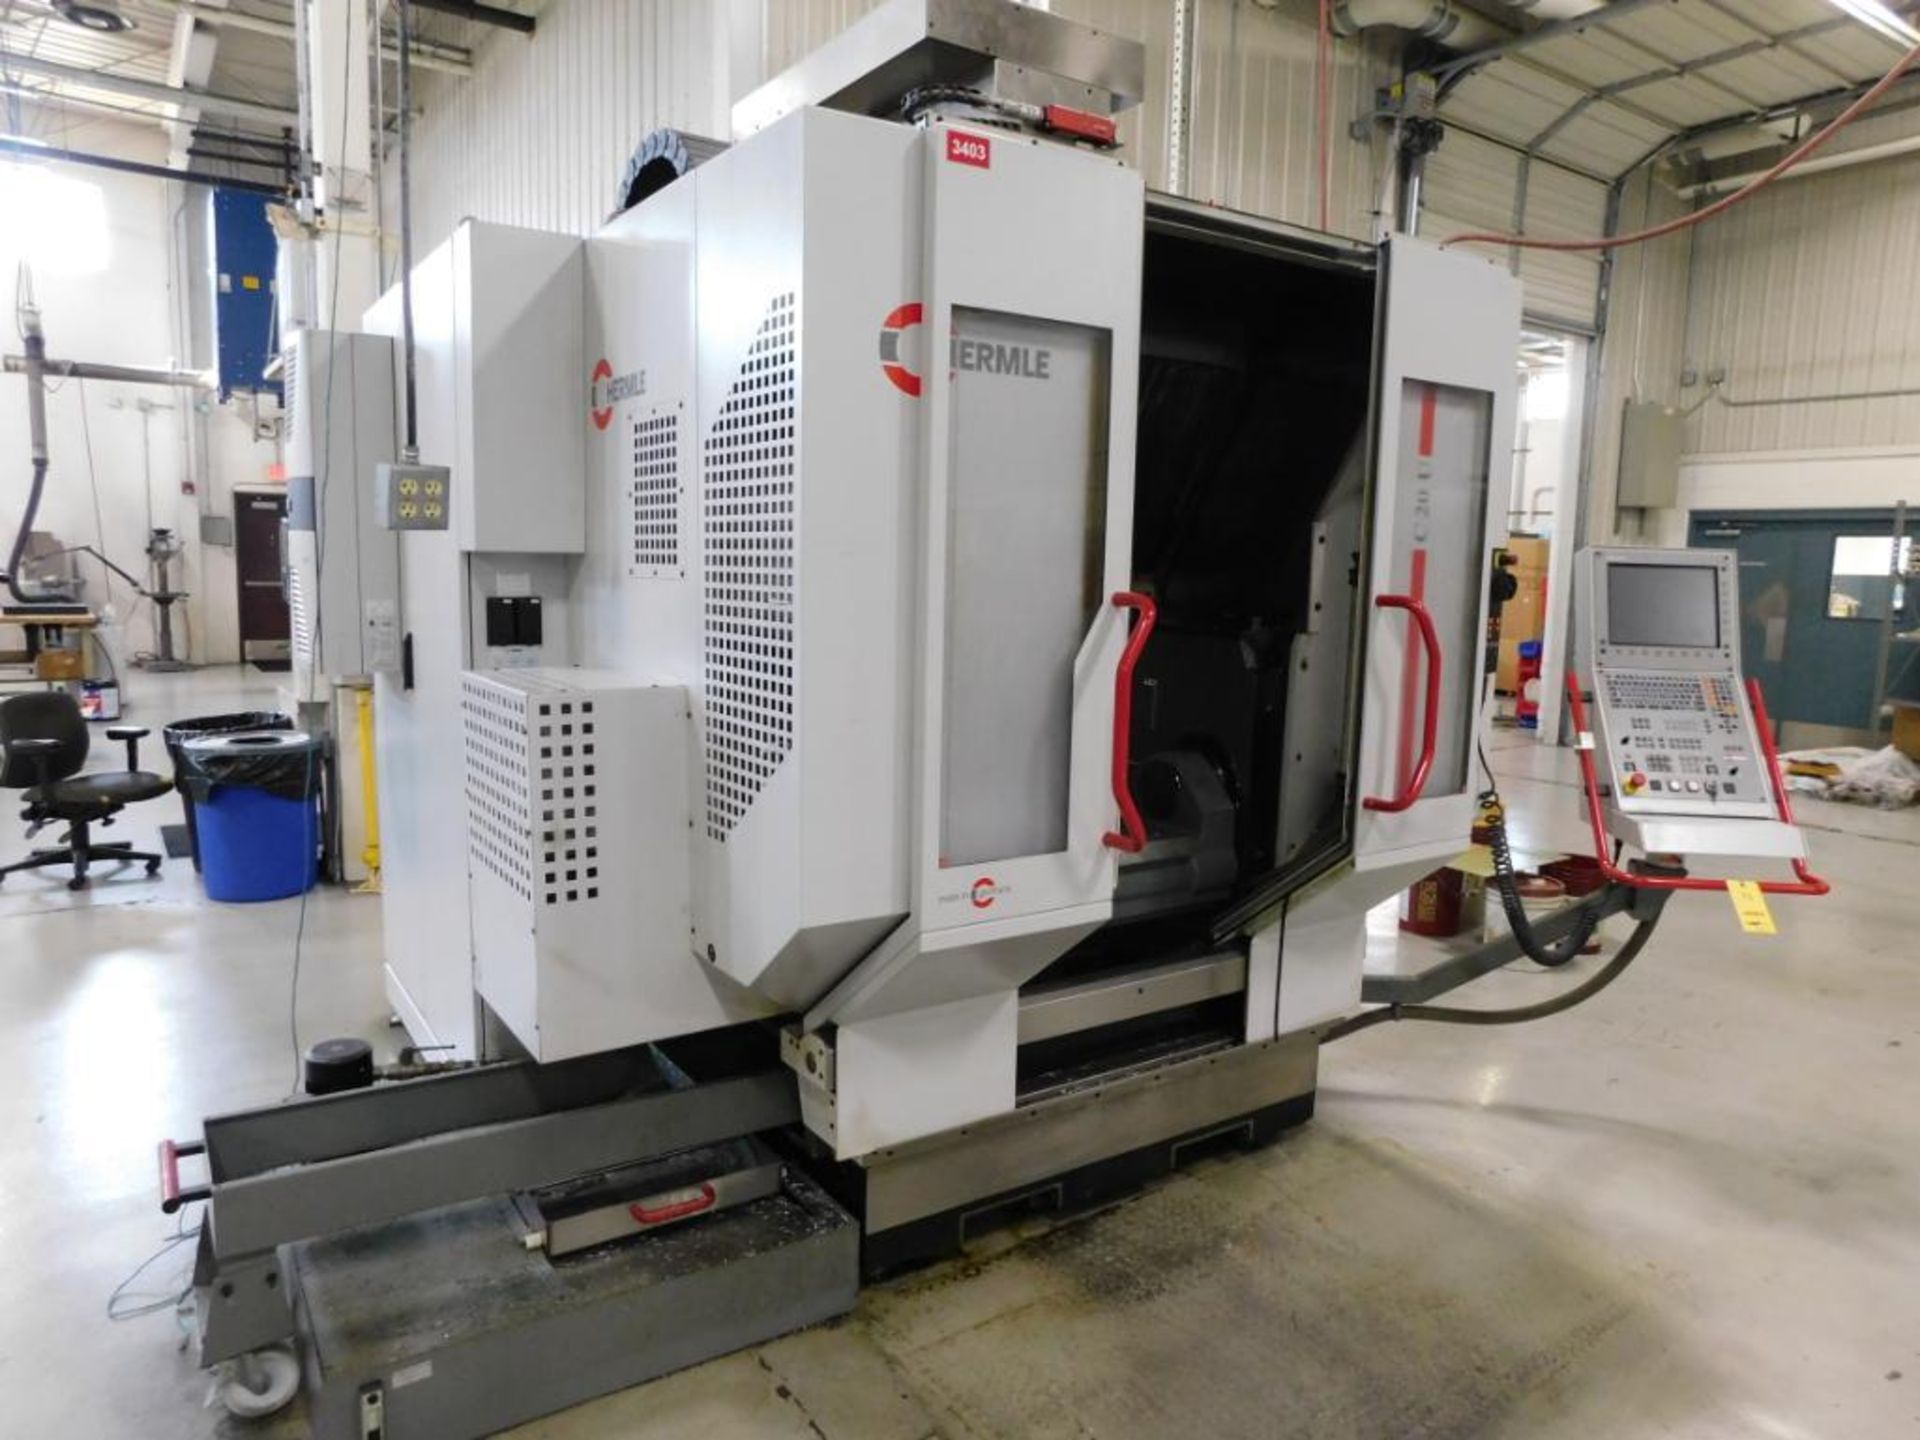 Hermle 5-Axis CNC Vertical Machining Center, Model C20U, S/N 19257 (2008), 16,000 RPM, 20 HP, HSK63, - Image 2 of 6